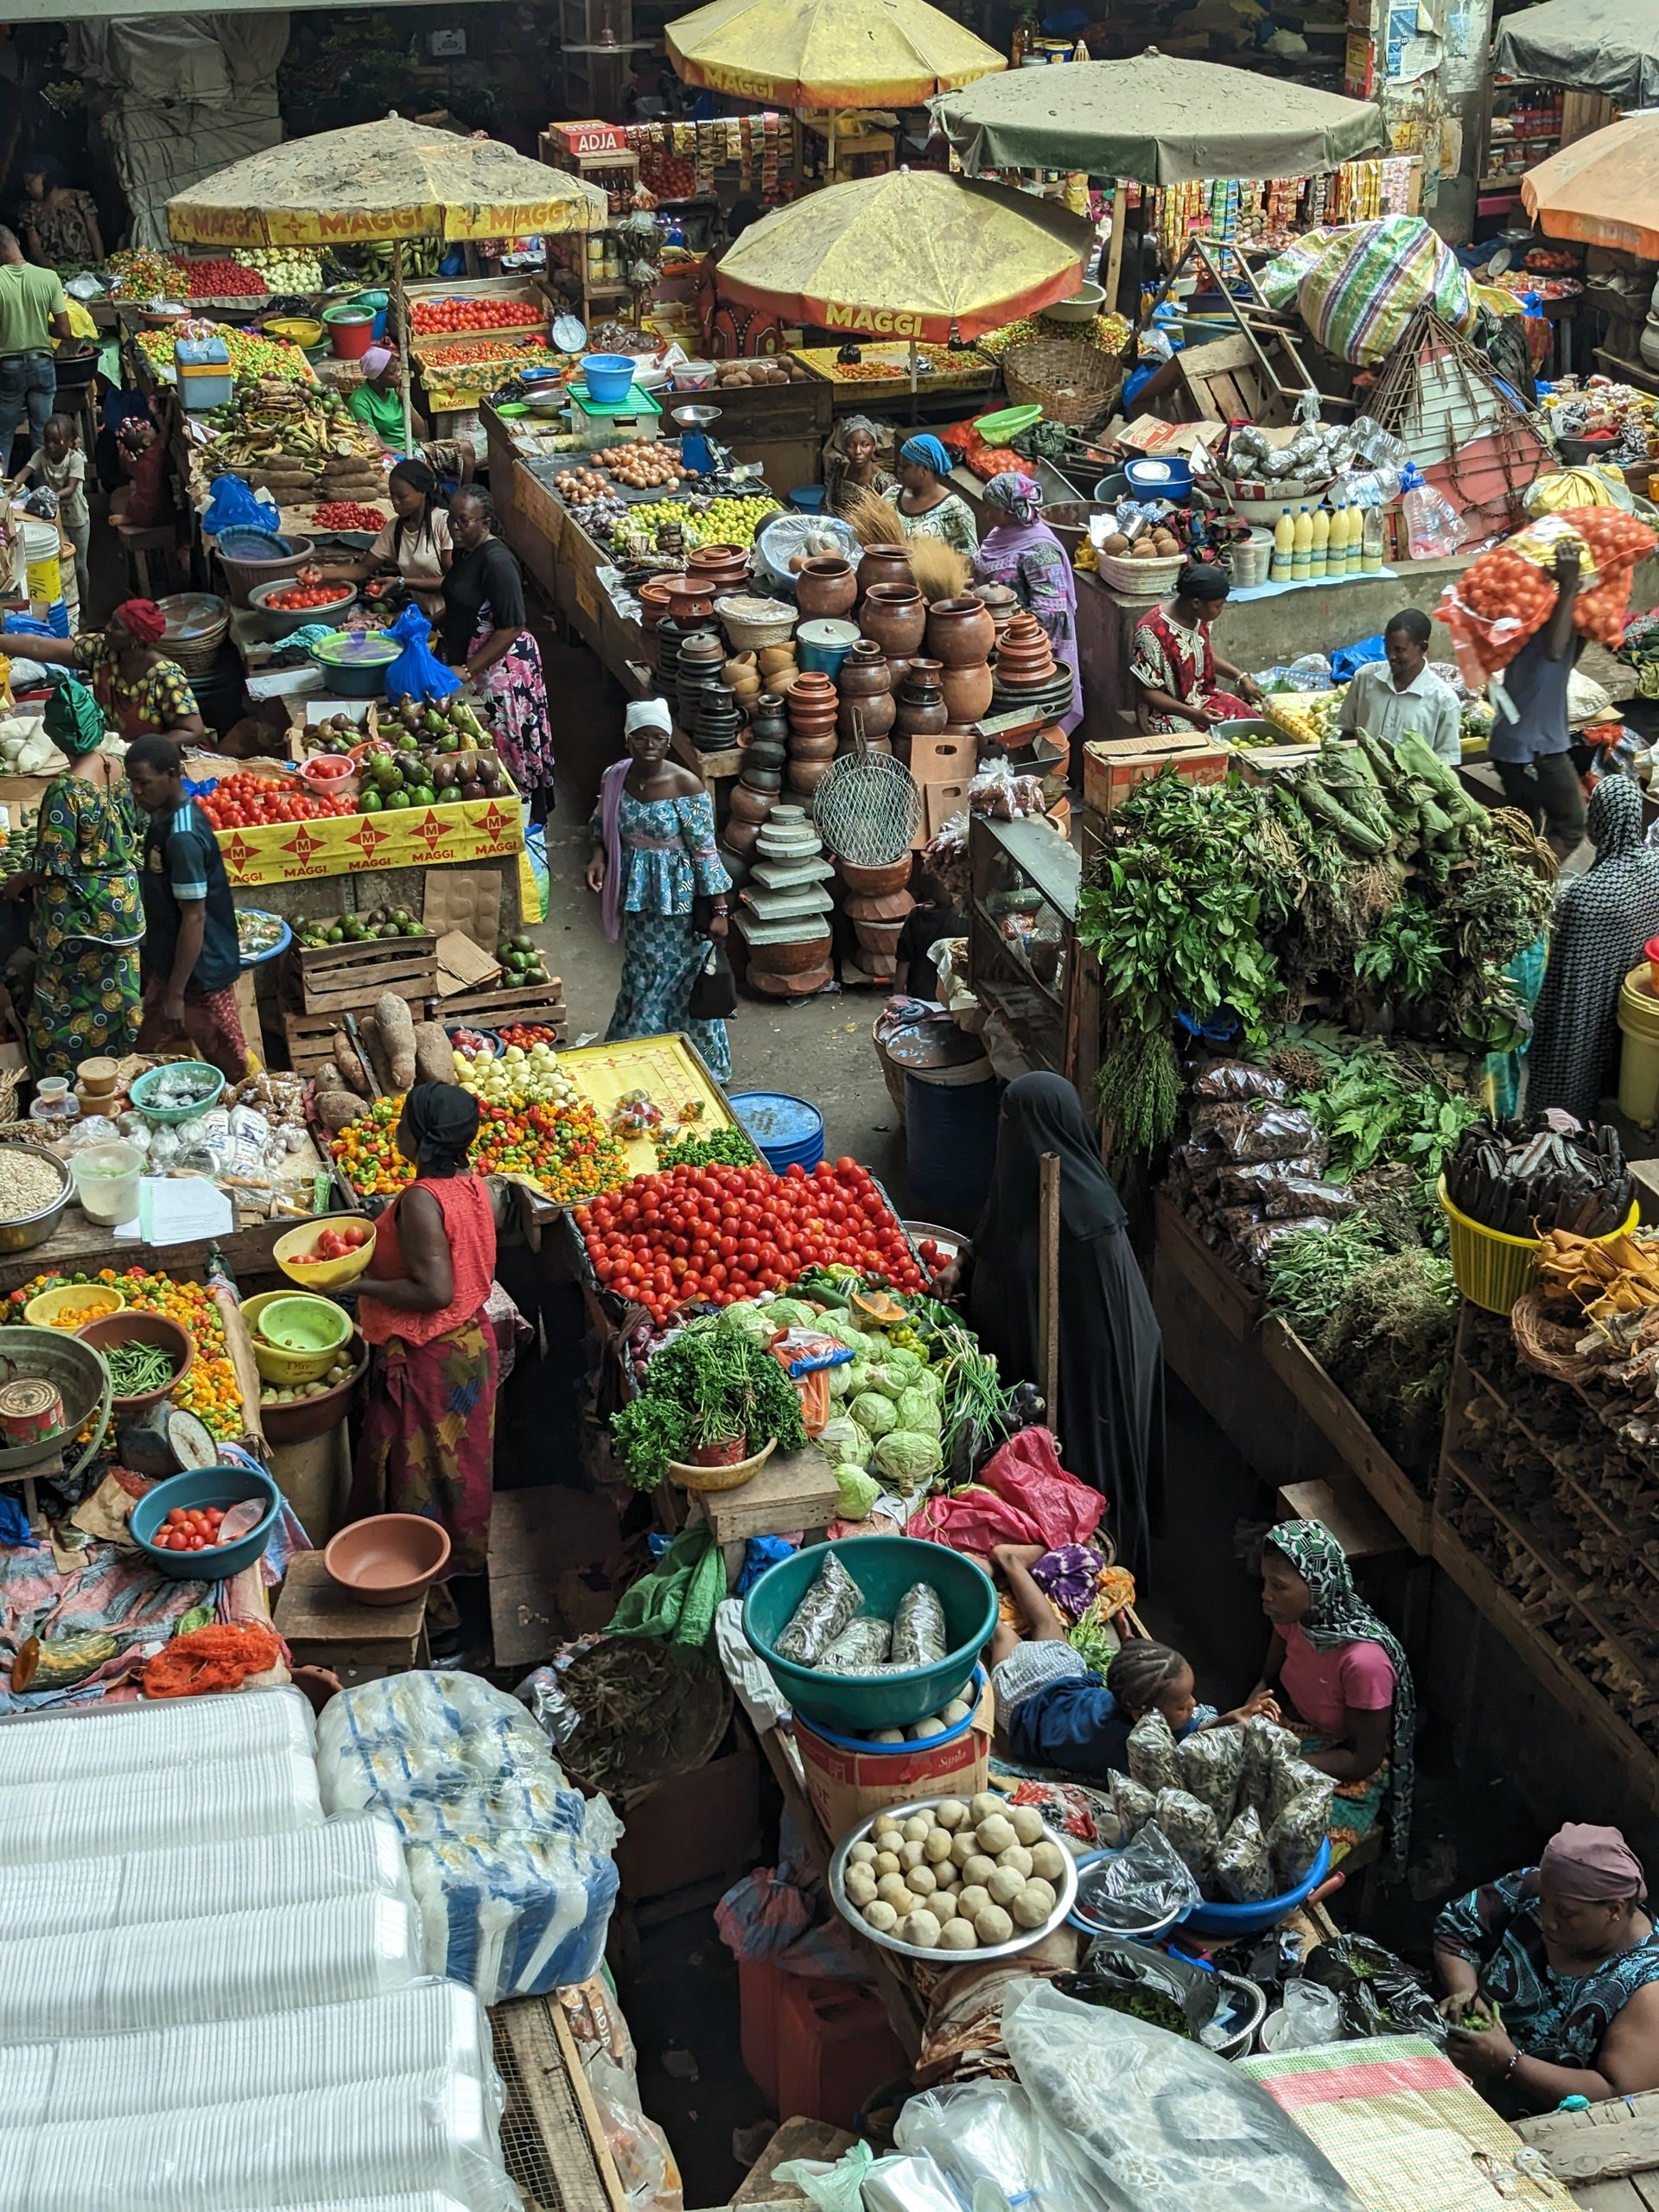  The market - so many memories in the form of sights, smells and sounds! 